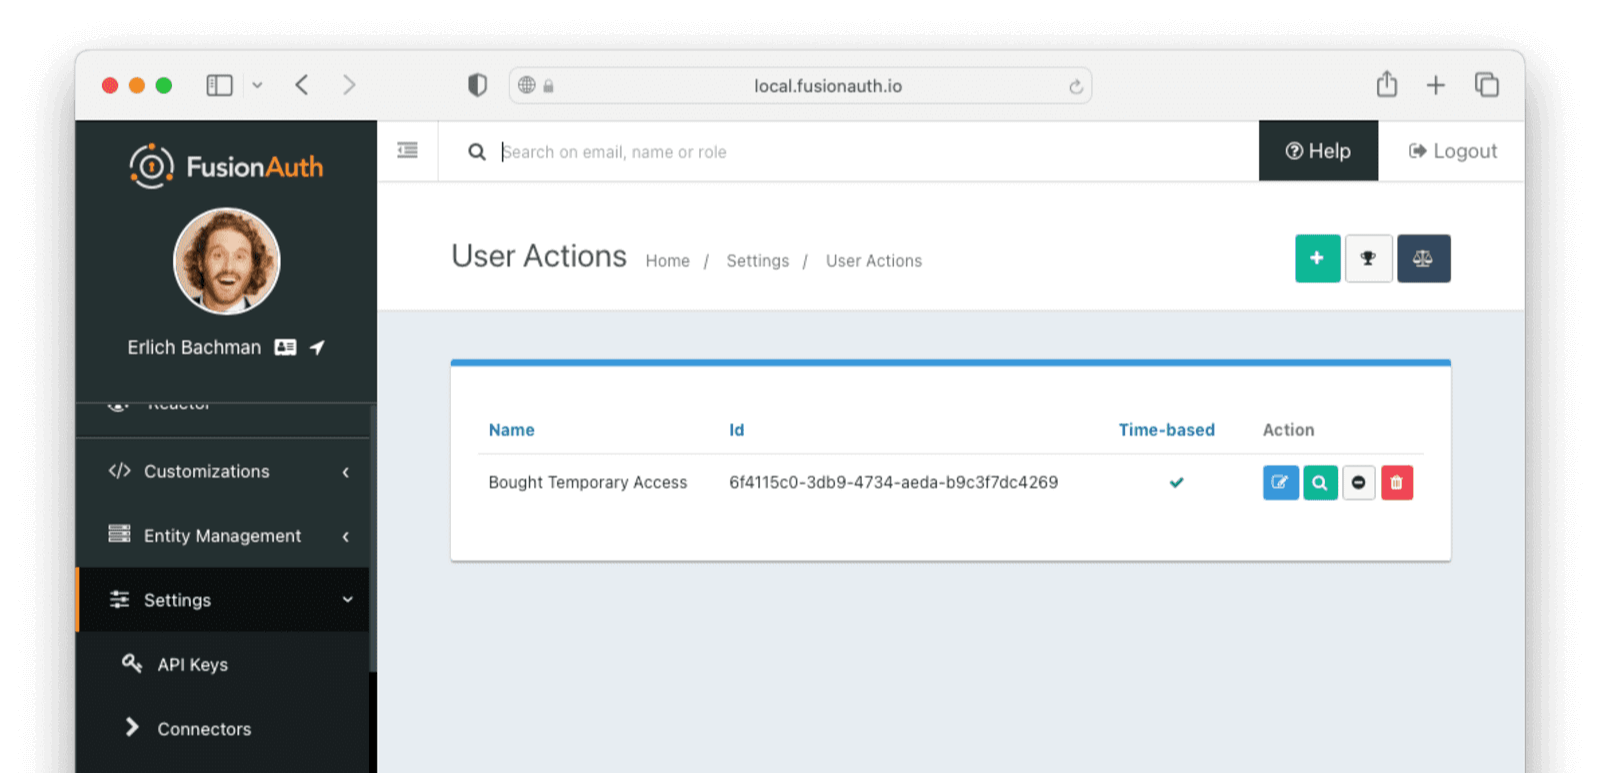 Verify that the User Action was created by checking in the admin portal.